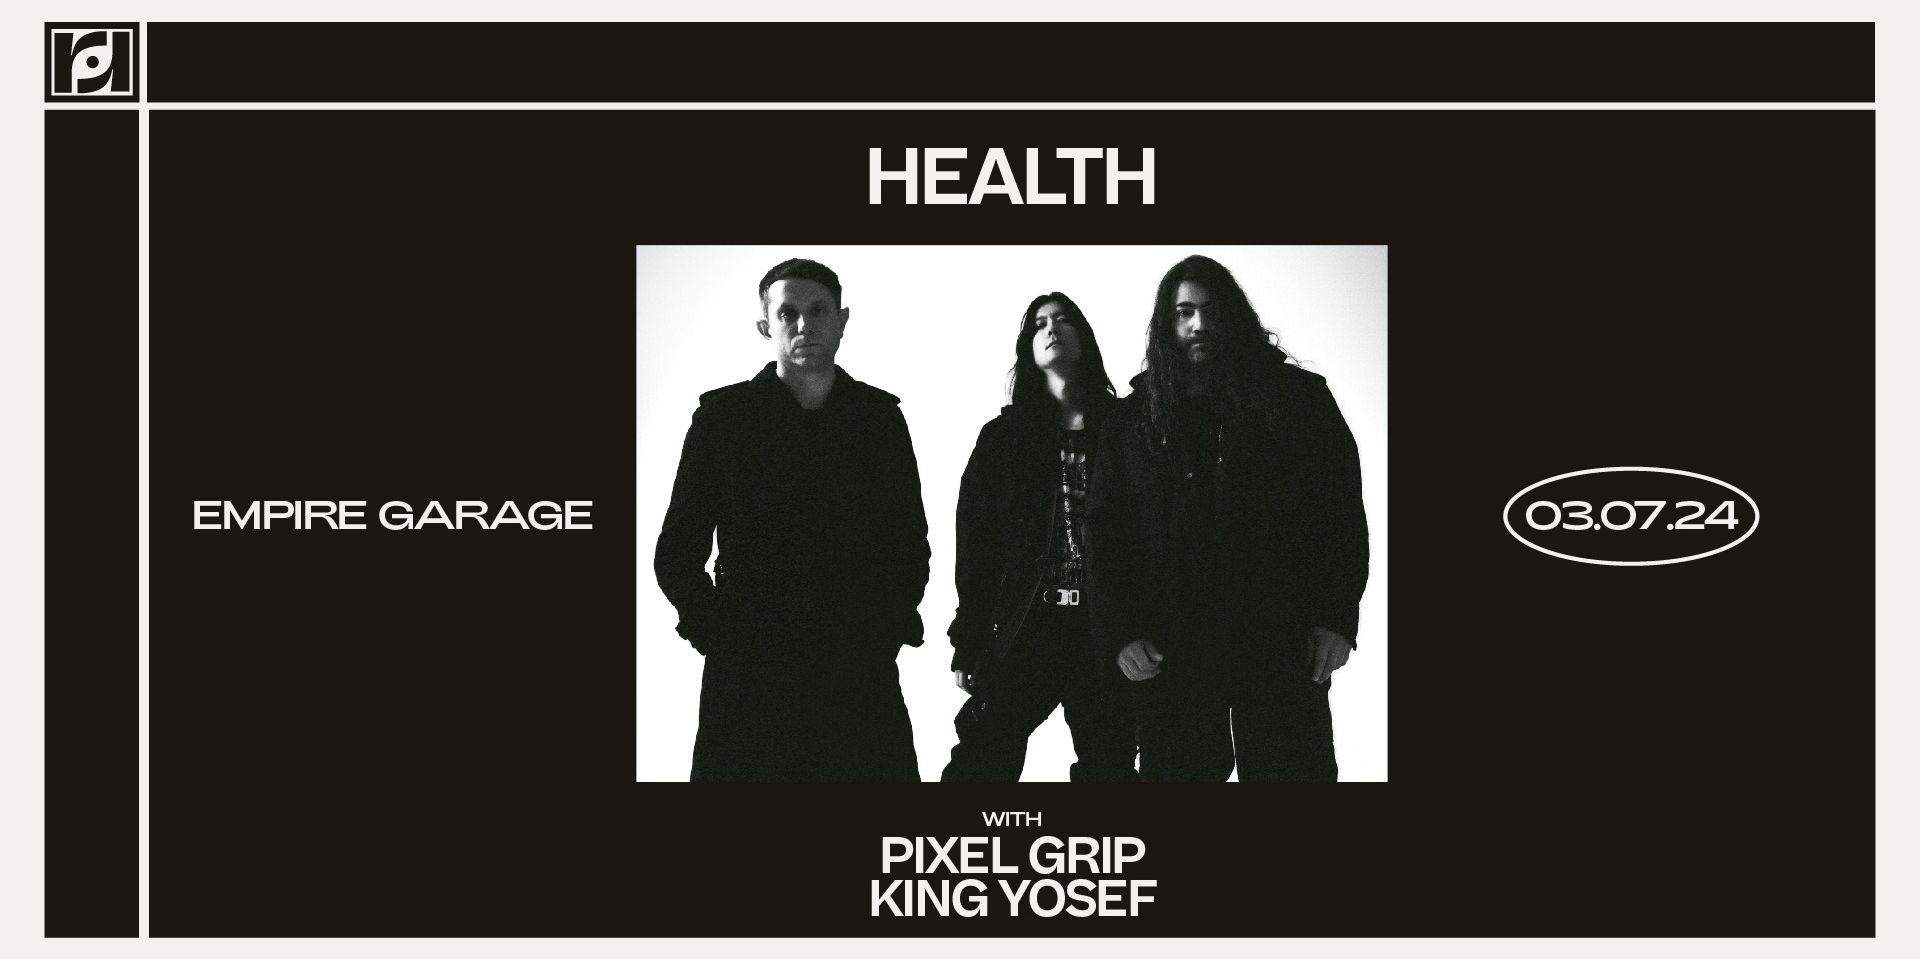 Resound Presents: Health w/ Pixel Grip and King Yosef at Empire Garage promotional image